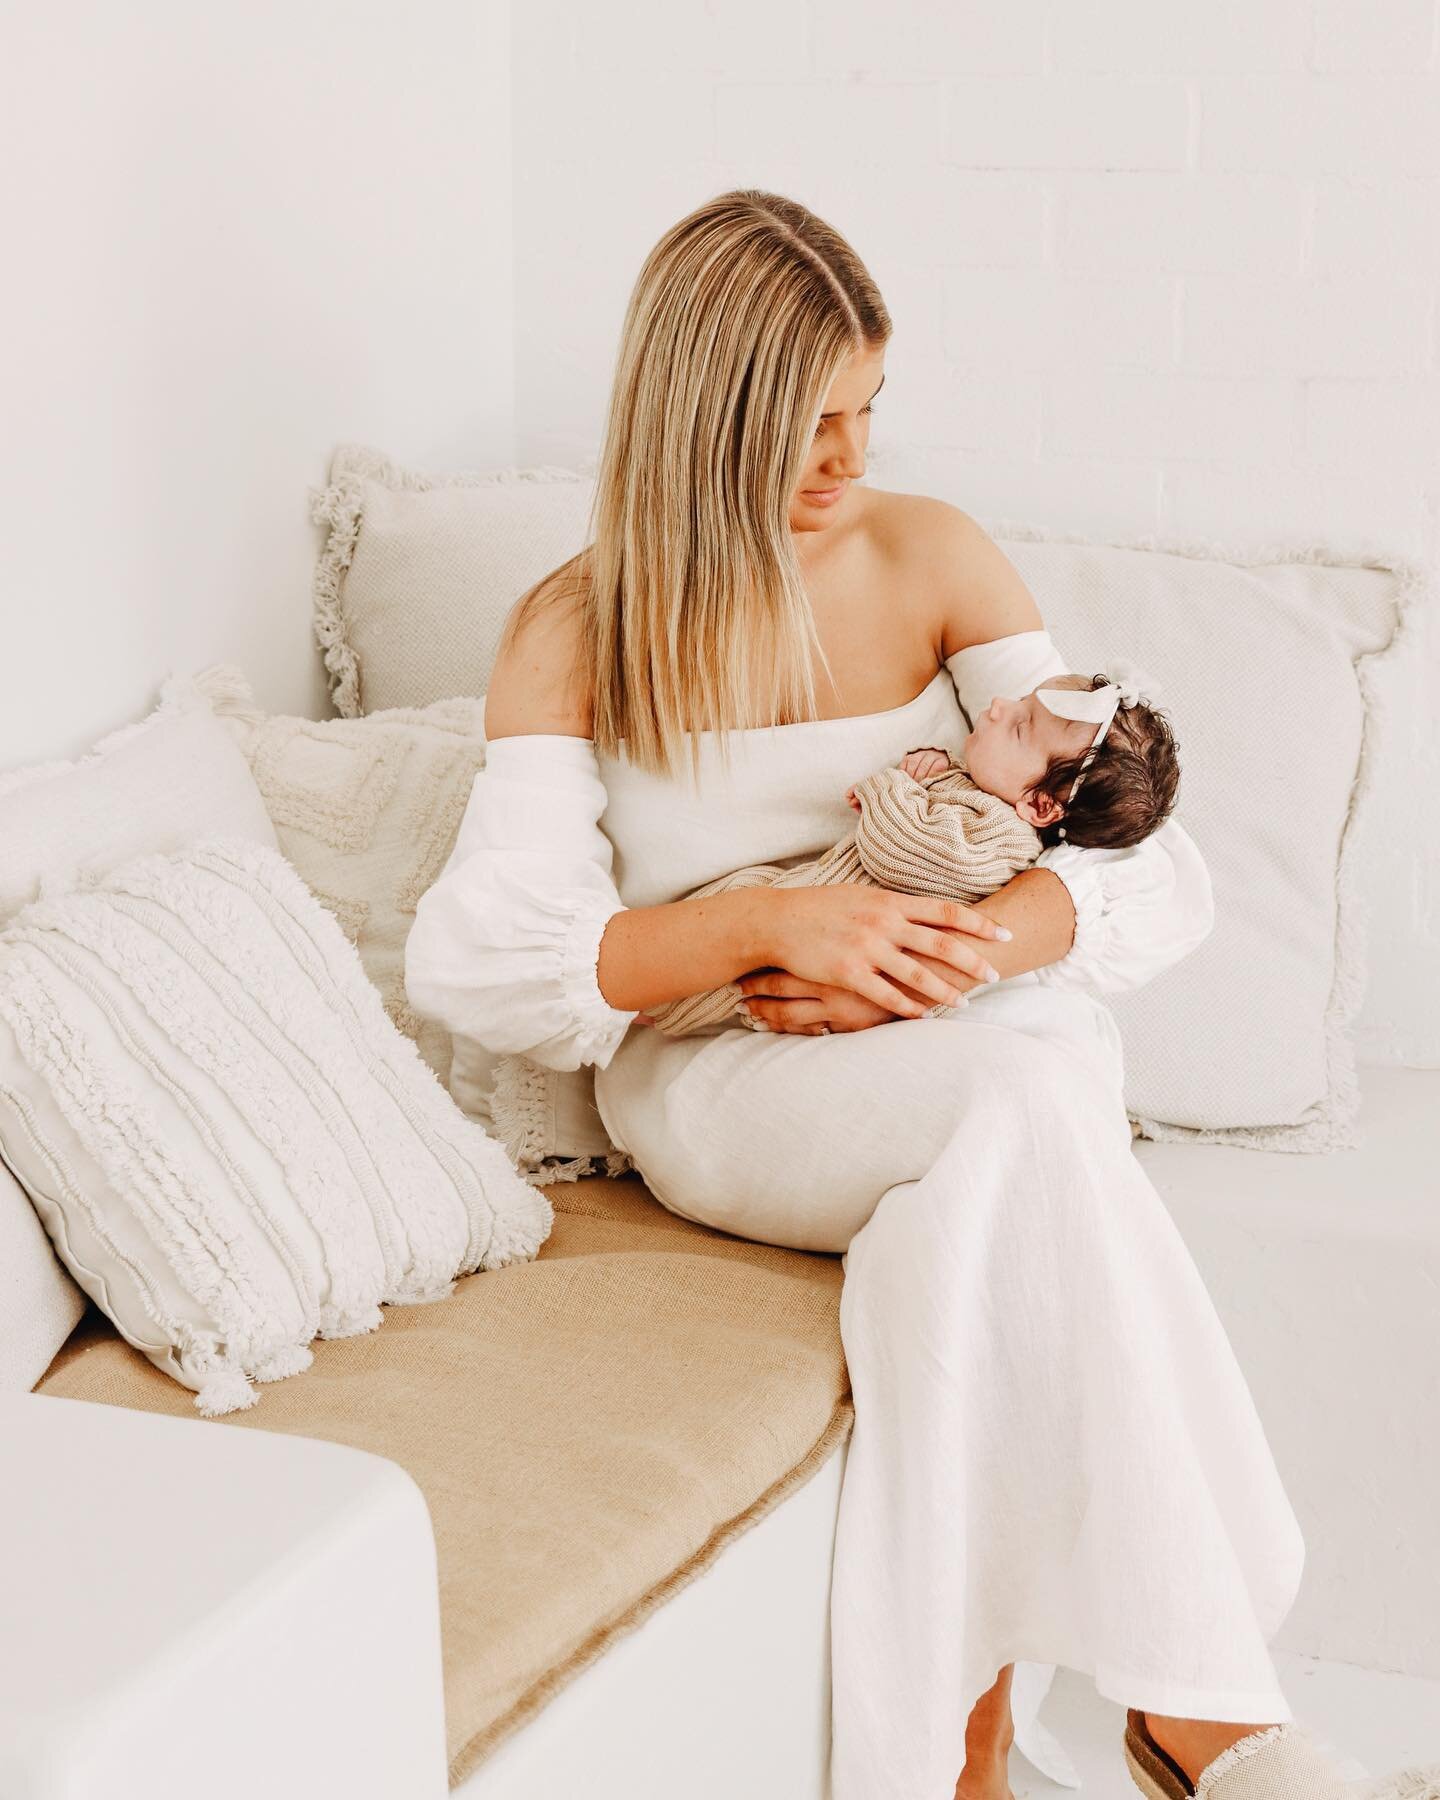 Welcoming baby Banksi ✨
This family is absolutely gorgeous, I could have photographed them all afternoon. 

So excited to have such a beautiful space to offer families, especially as we enter the winter months.